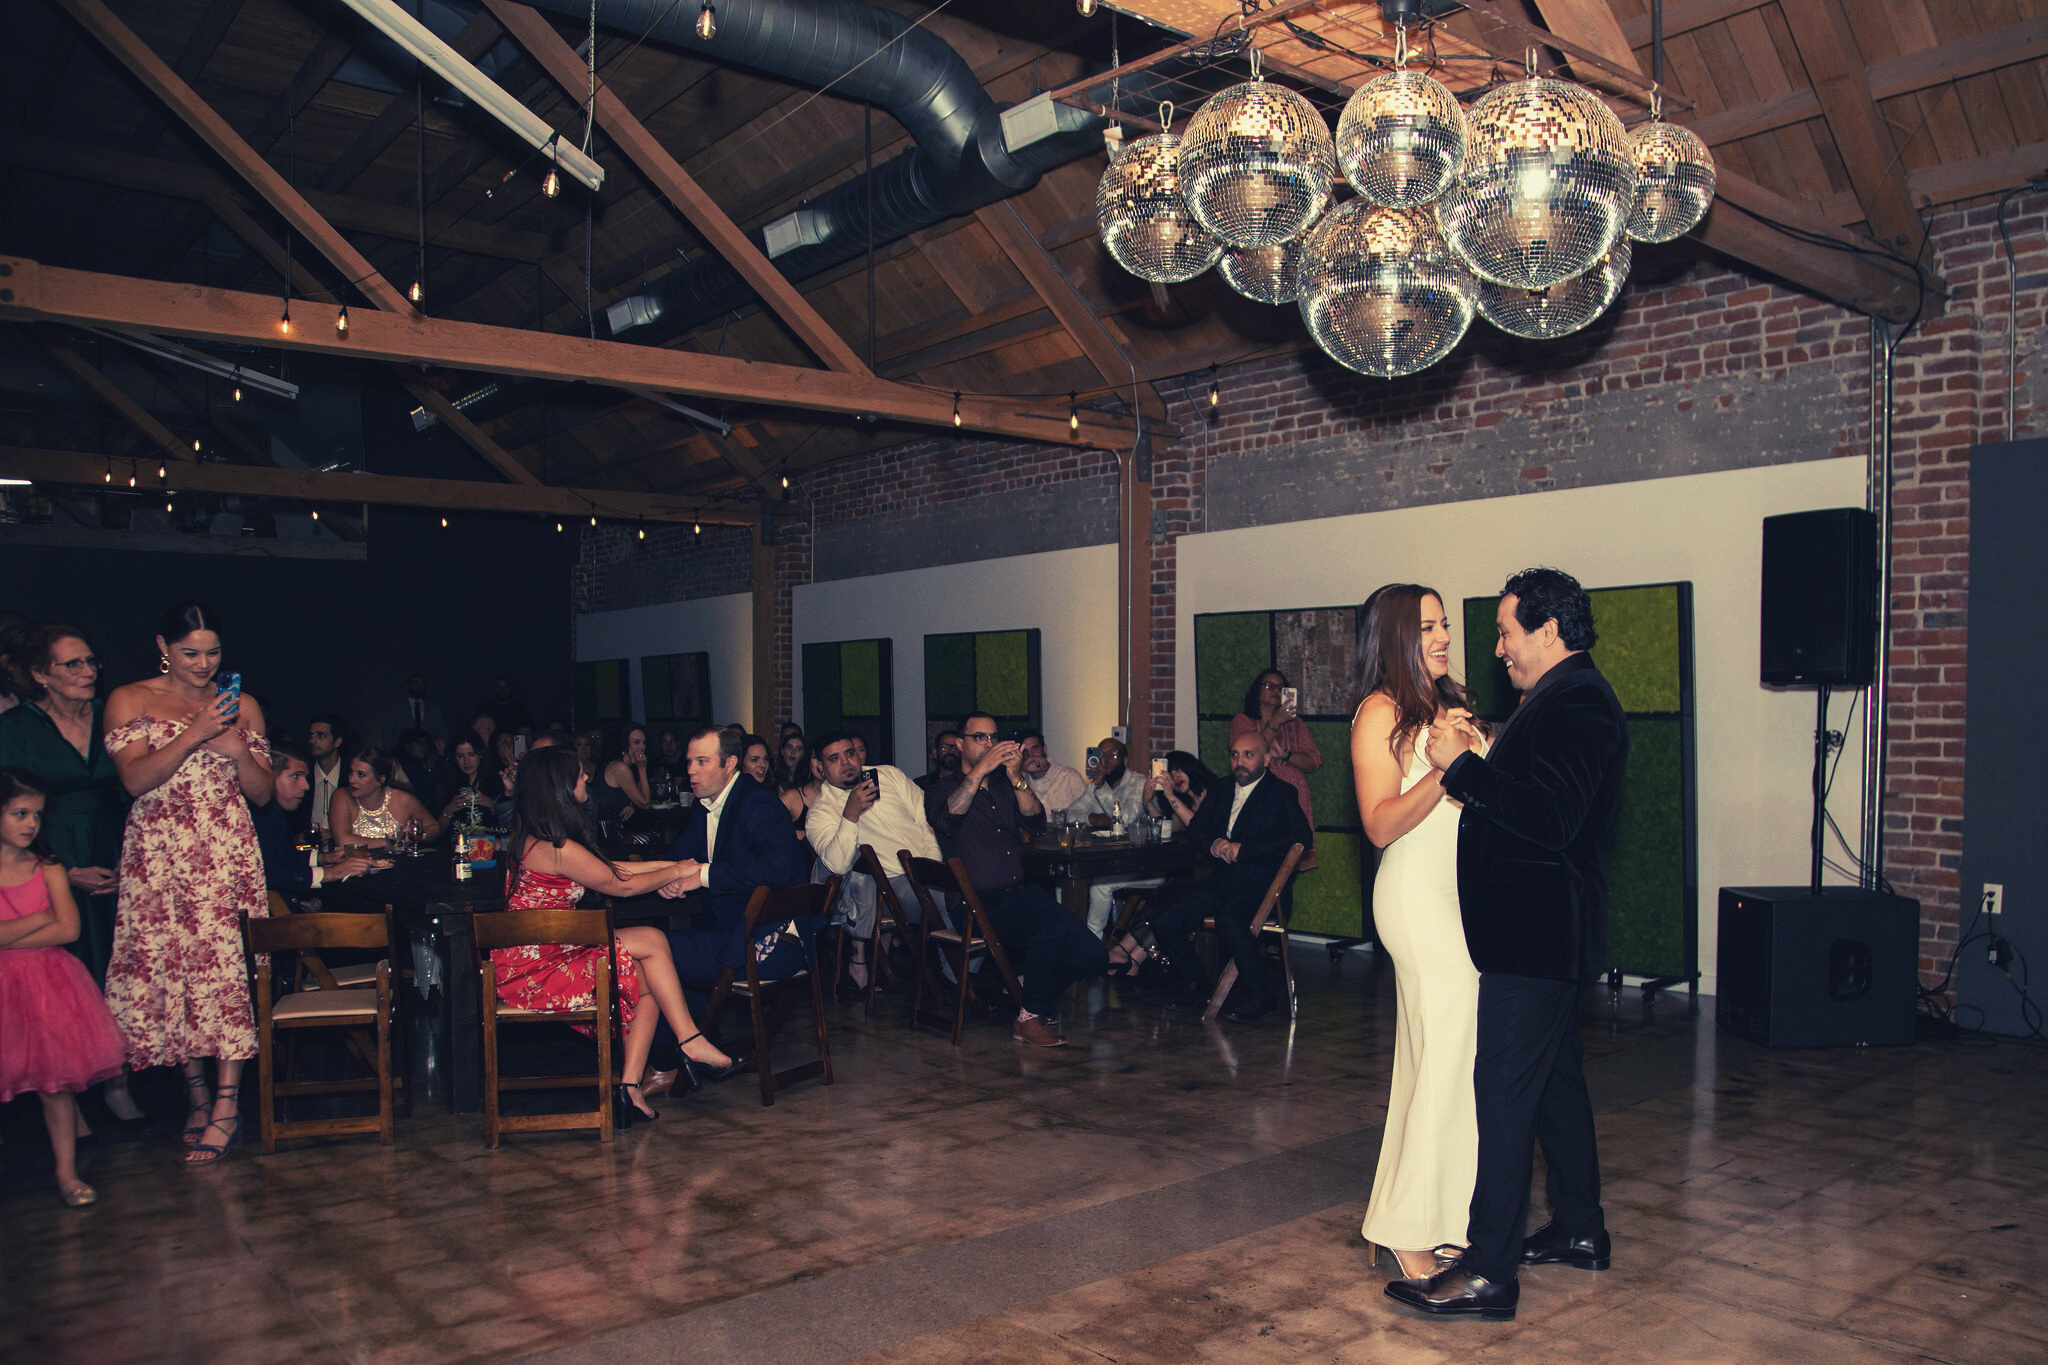 MG Studio Wedding Event Space Downtown Los Angeles Renovated Warehouse Exposed Brick Wood Beams Concrete Modern Industrial Chic - First Dance Happy Couple